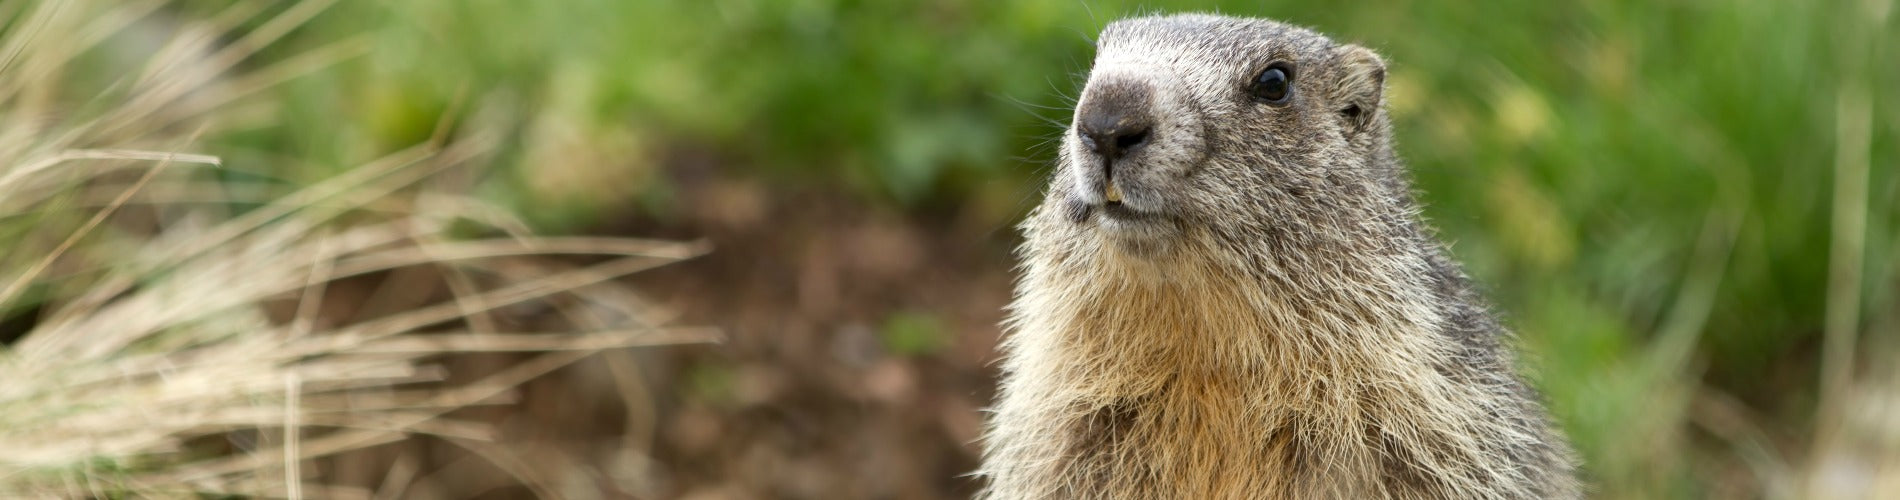 Groundhog Day – Can an Earlier Spring Mean Better Sleep for Us?